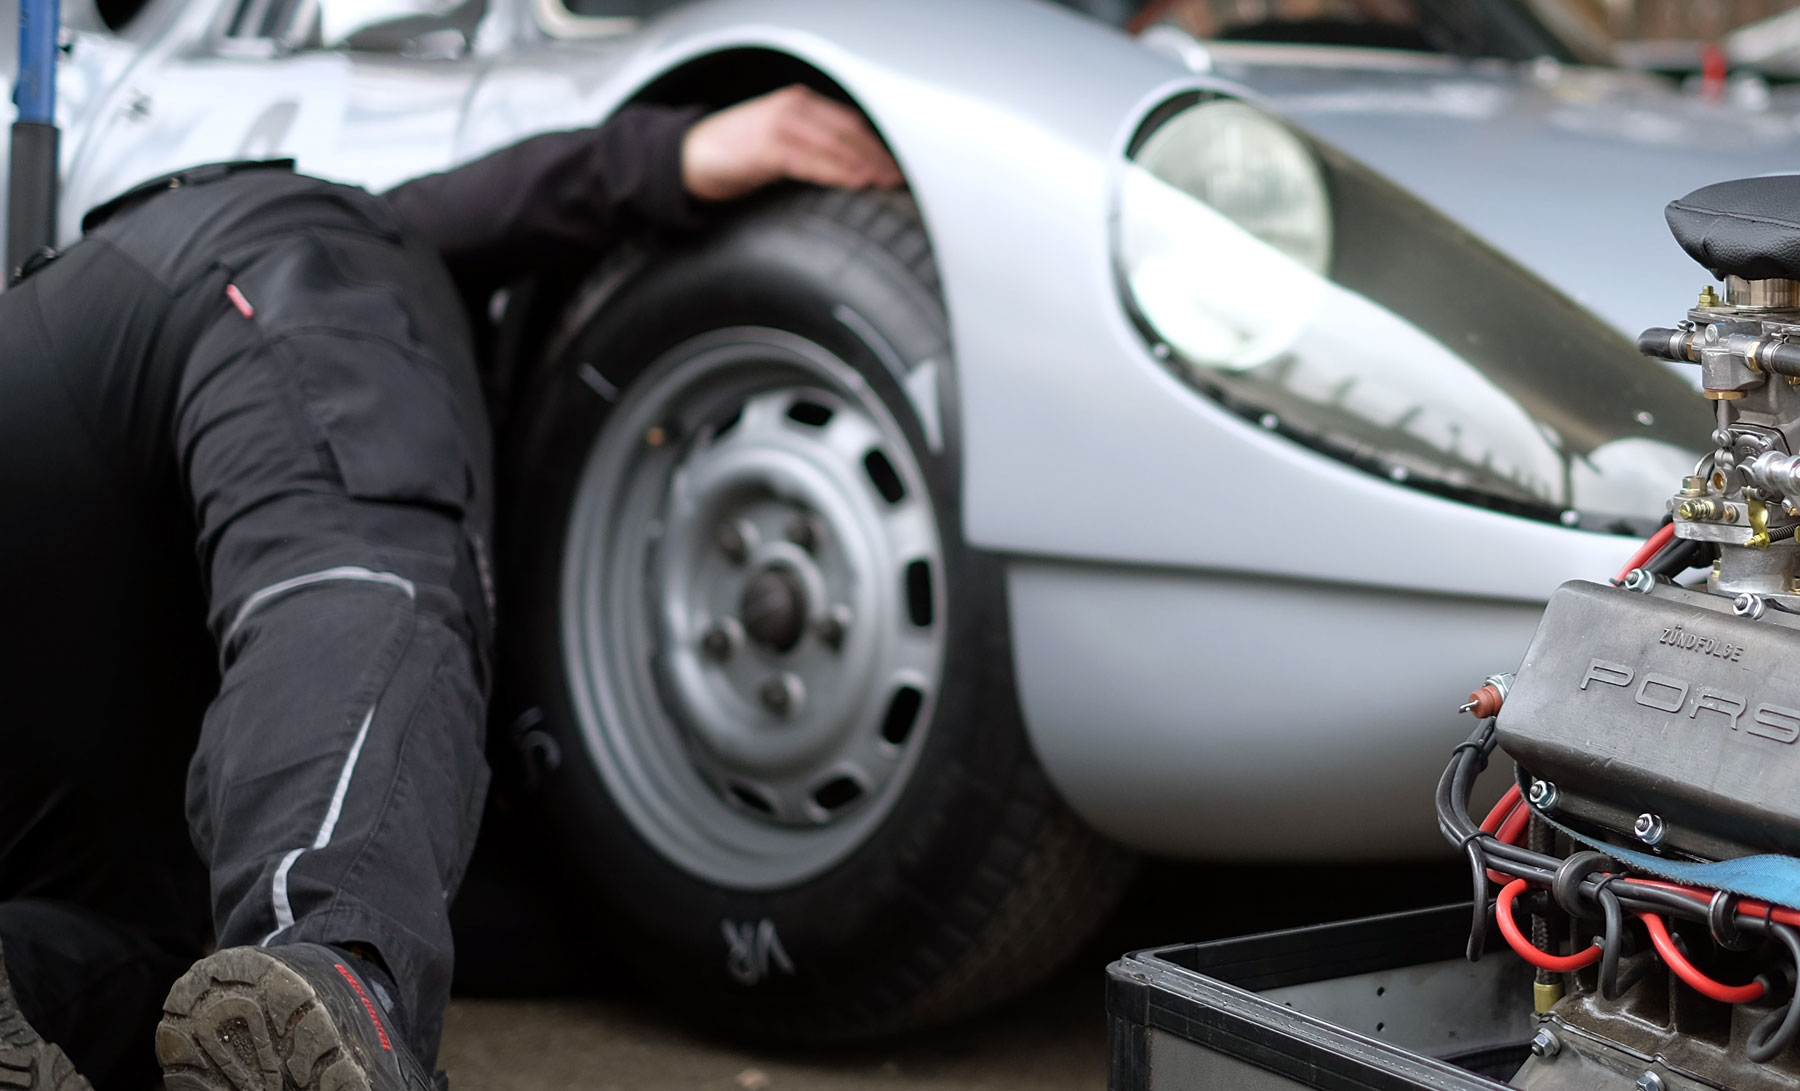 perform a complete diagnosis with mobile data capture to improve tire check process